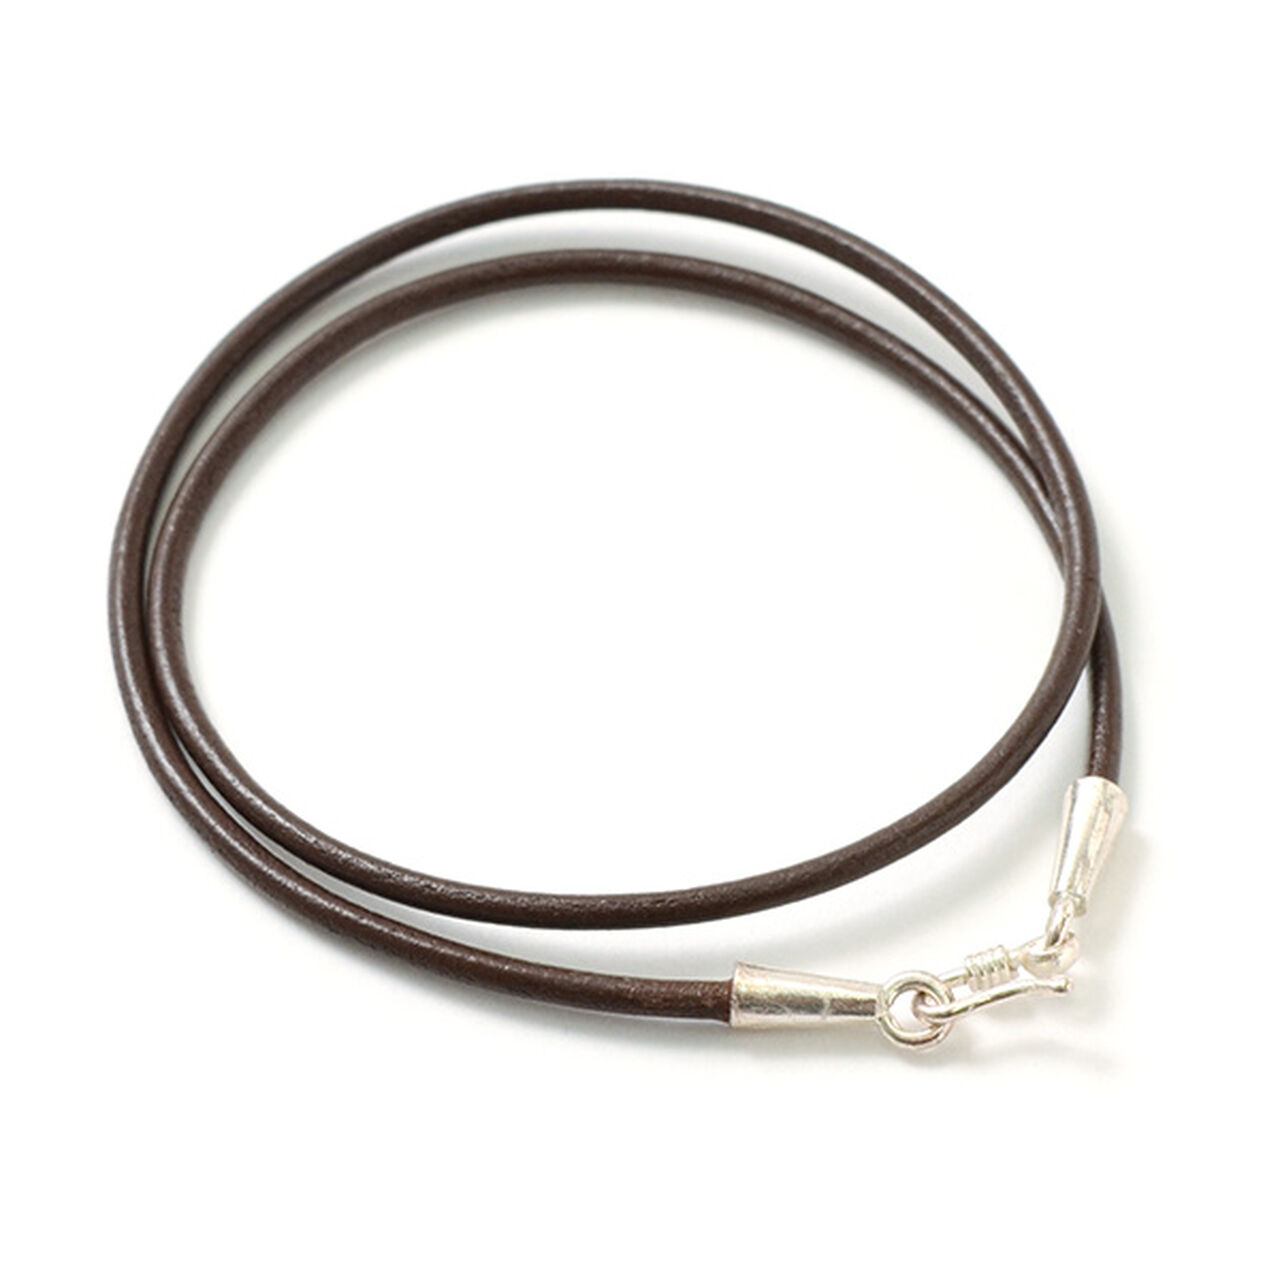 Leather choker (2.5mm) necklace,Brown, large image number 0